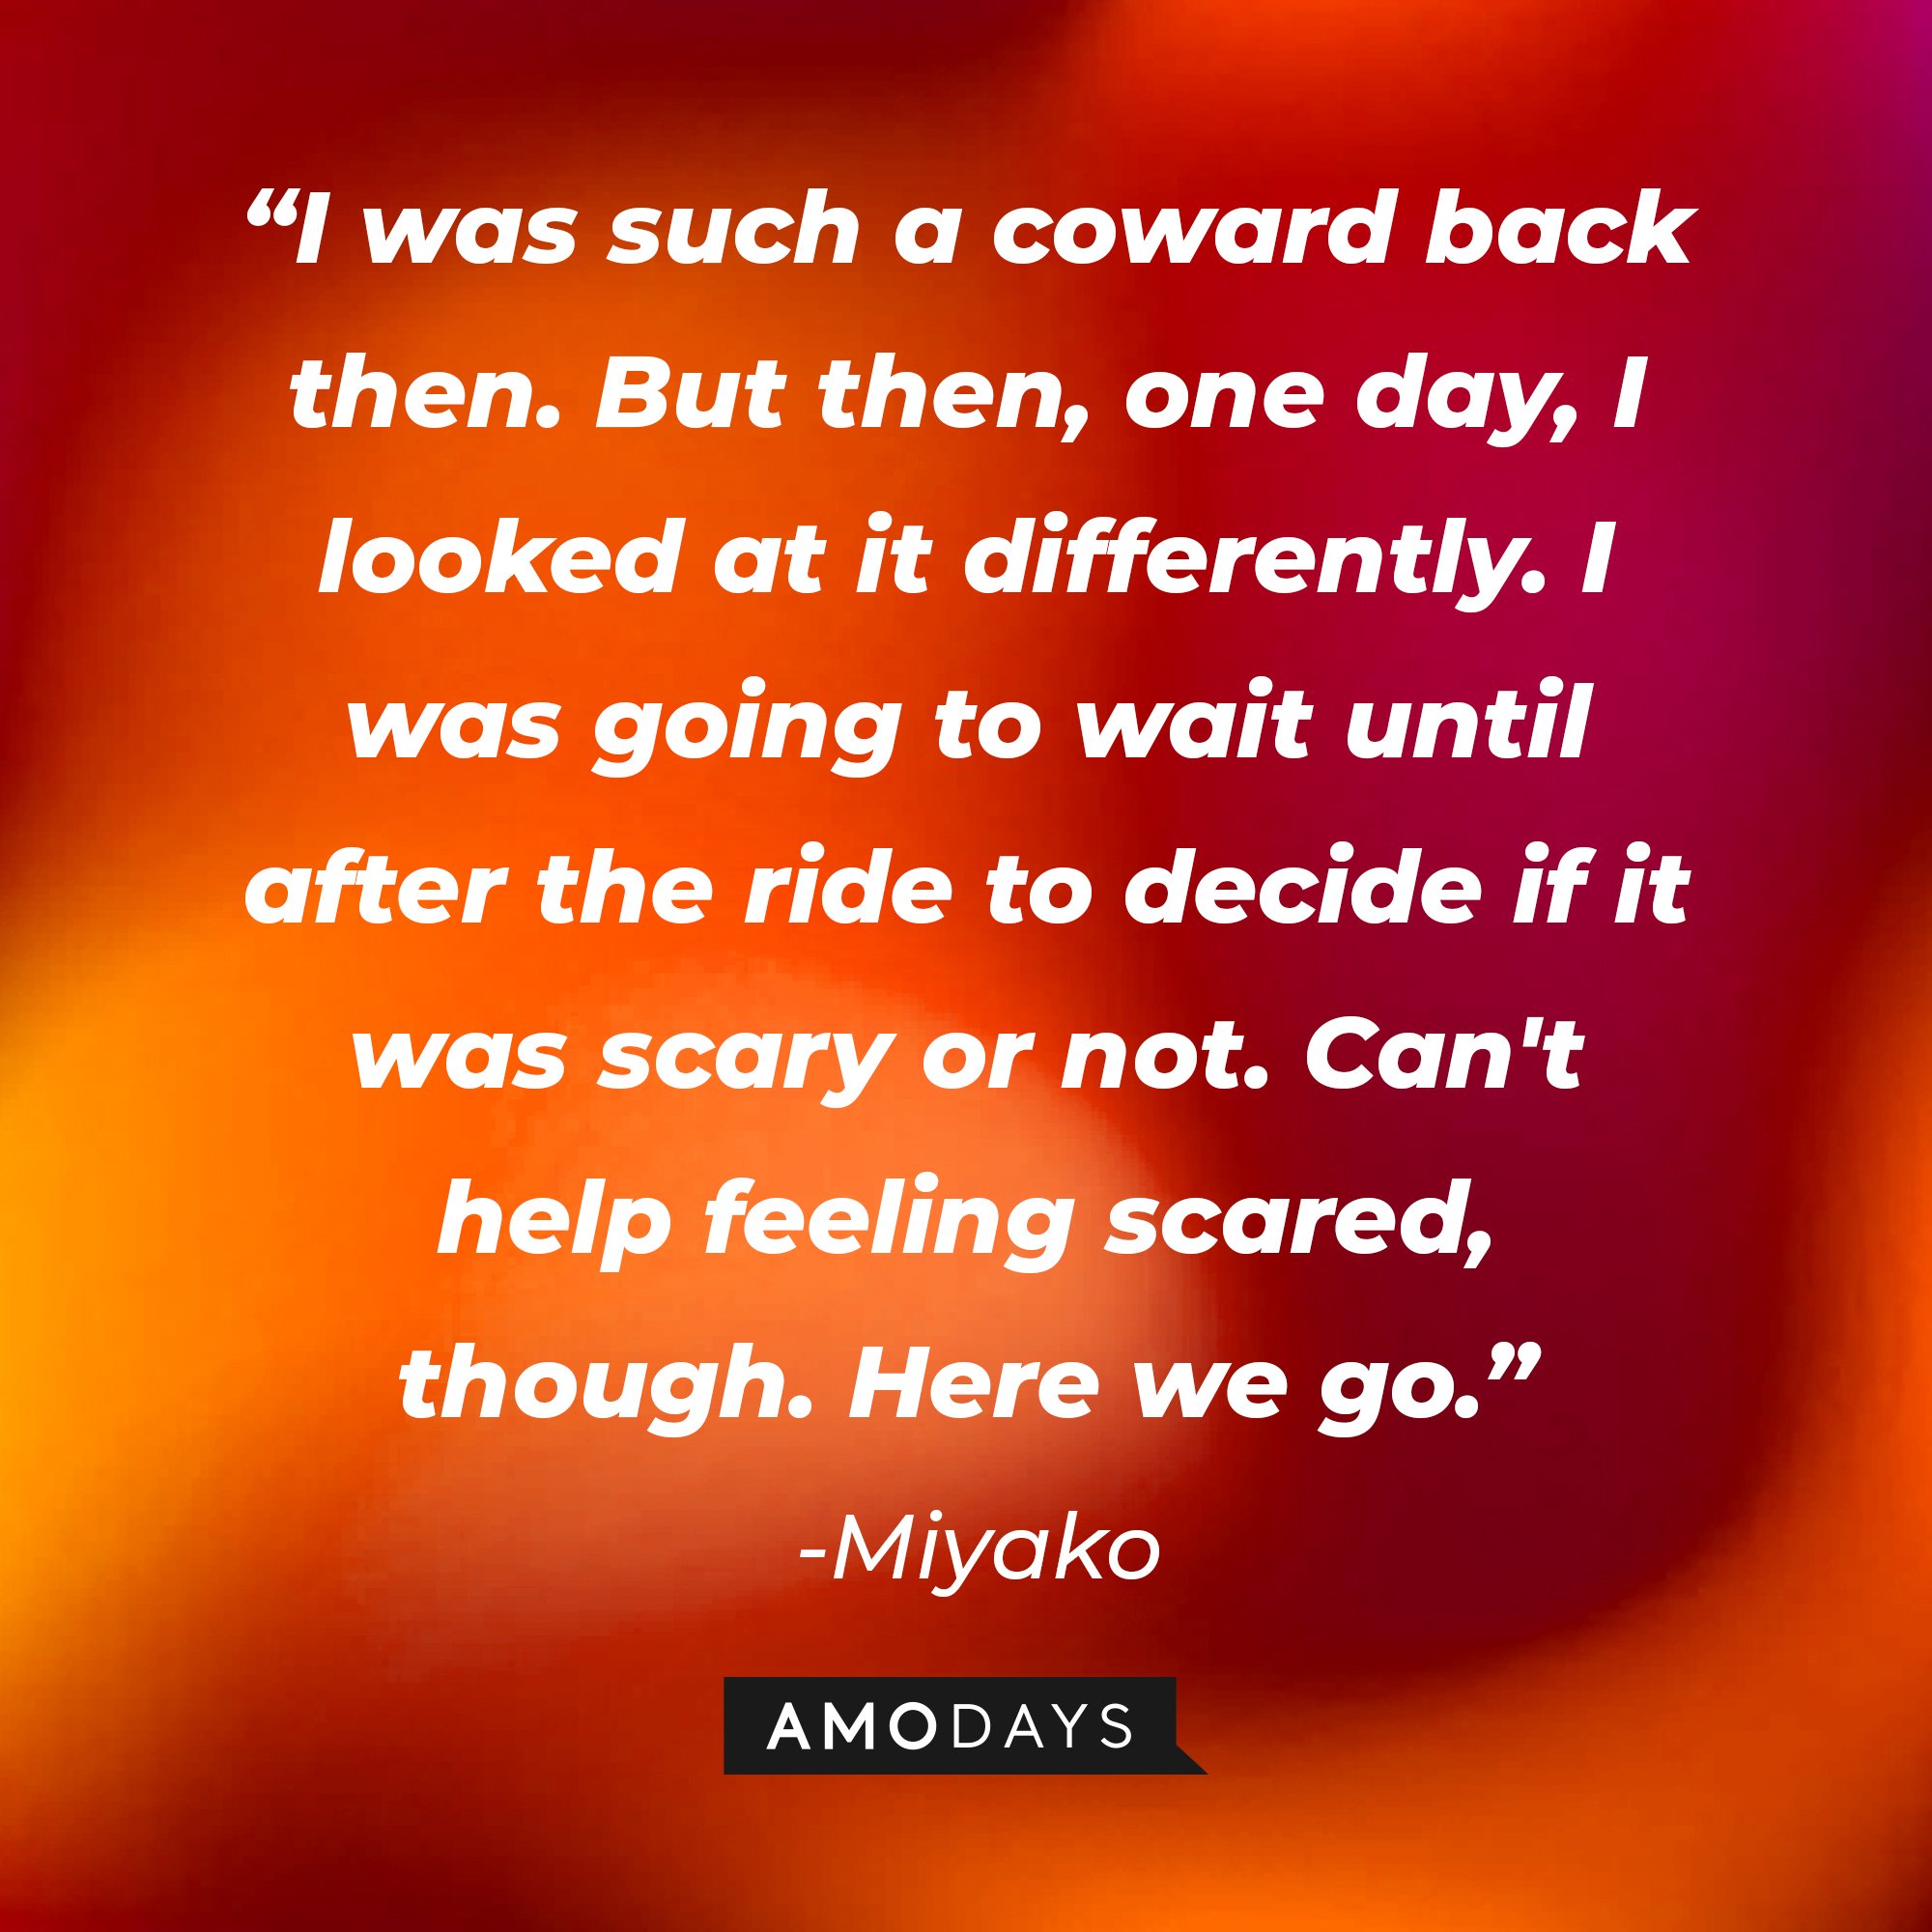 Miyoko’s quote: "I was such a coward back then. But then, one day, I looked at it differently. I was going to wait until after the ride to decide if it was scary or not. Can't help feeling scared, though. Here we go.” | Image: AmoDays   